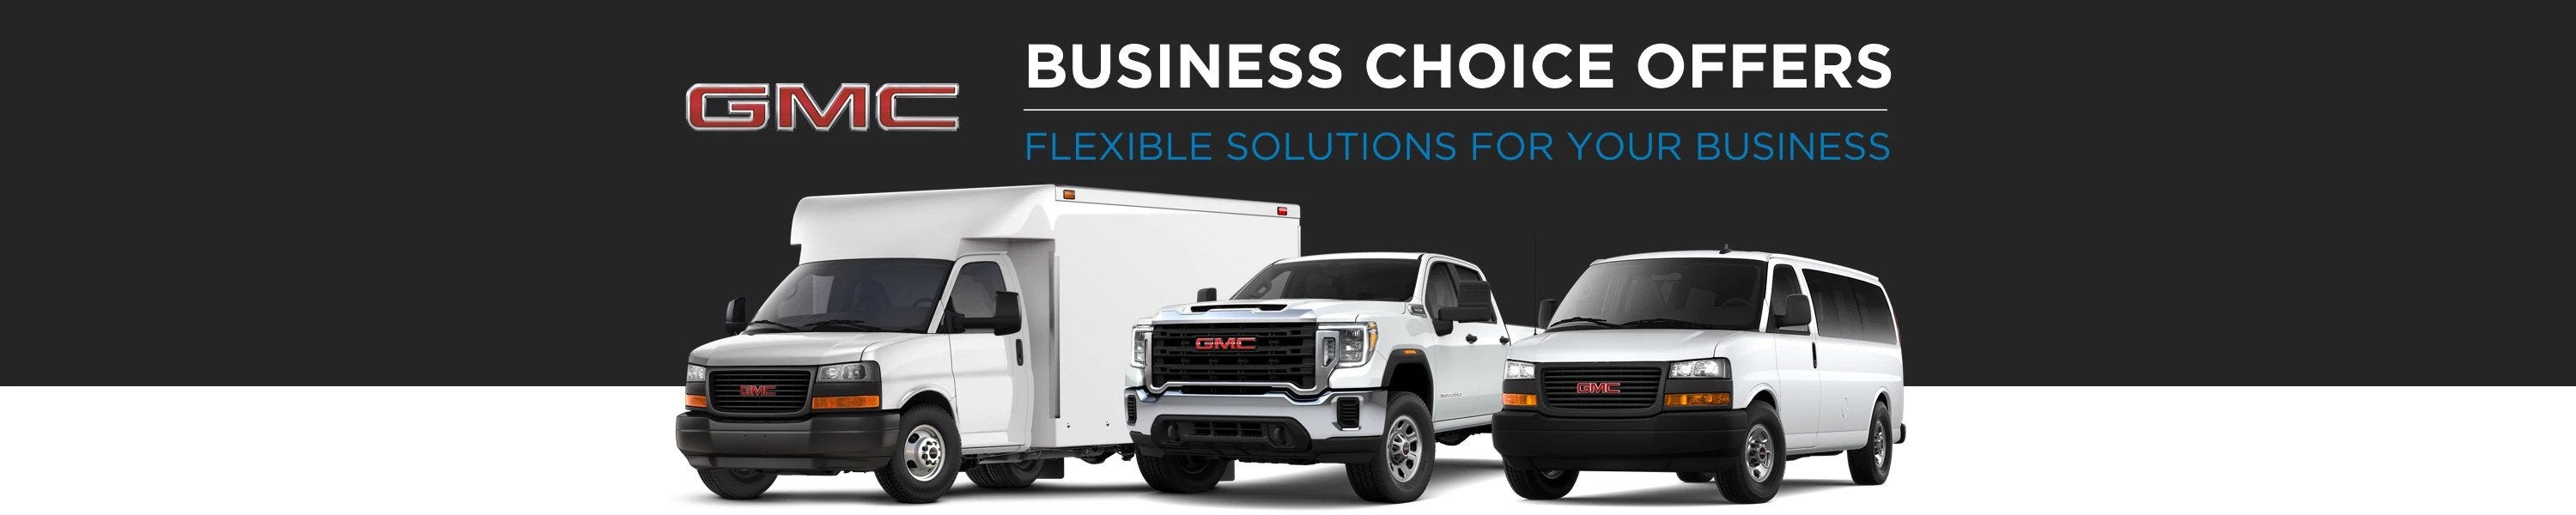 GMC Business Choice Offers - Flexible Solutions for your Business - SVG Chevrolet GMC Washington Court House in Washington Court House OH